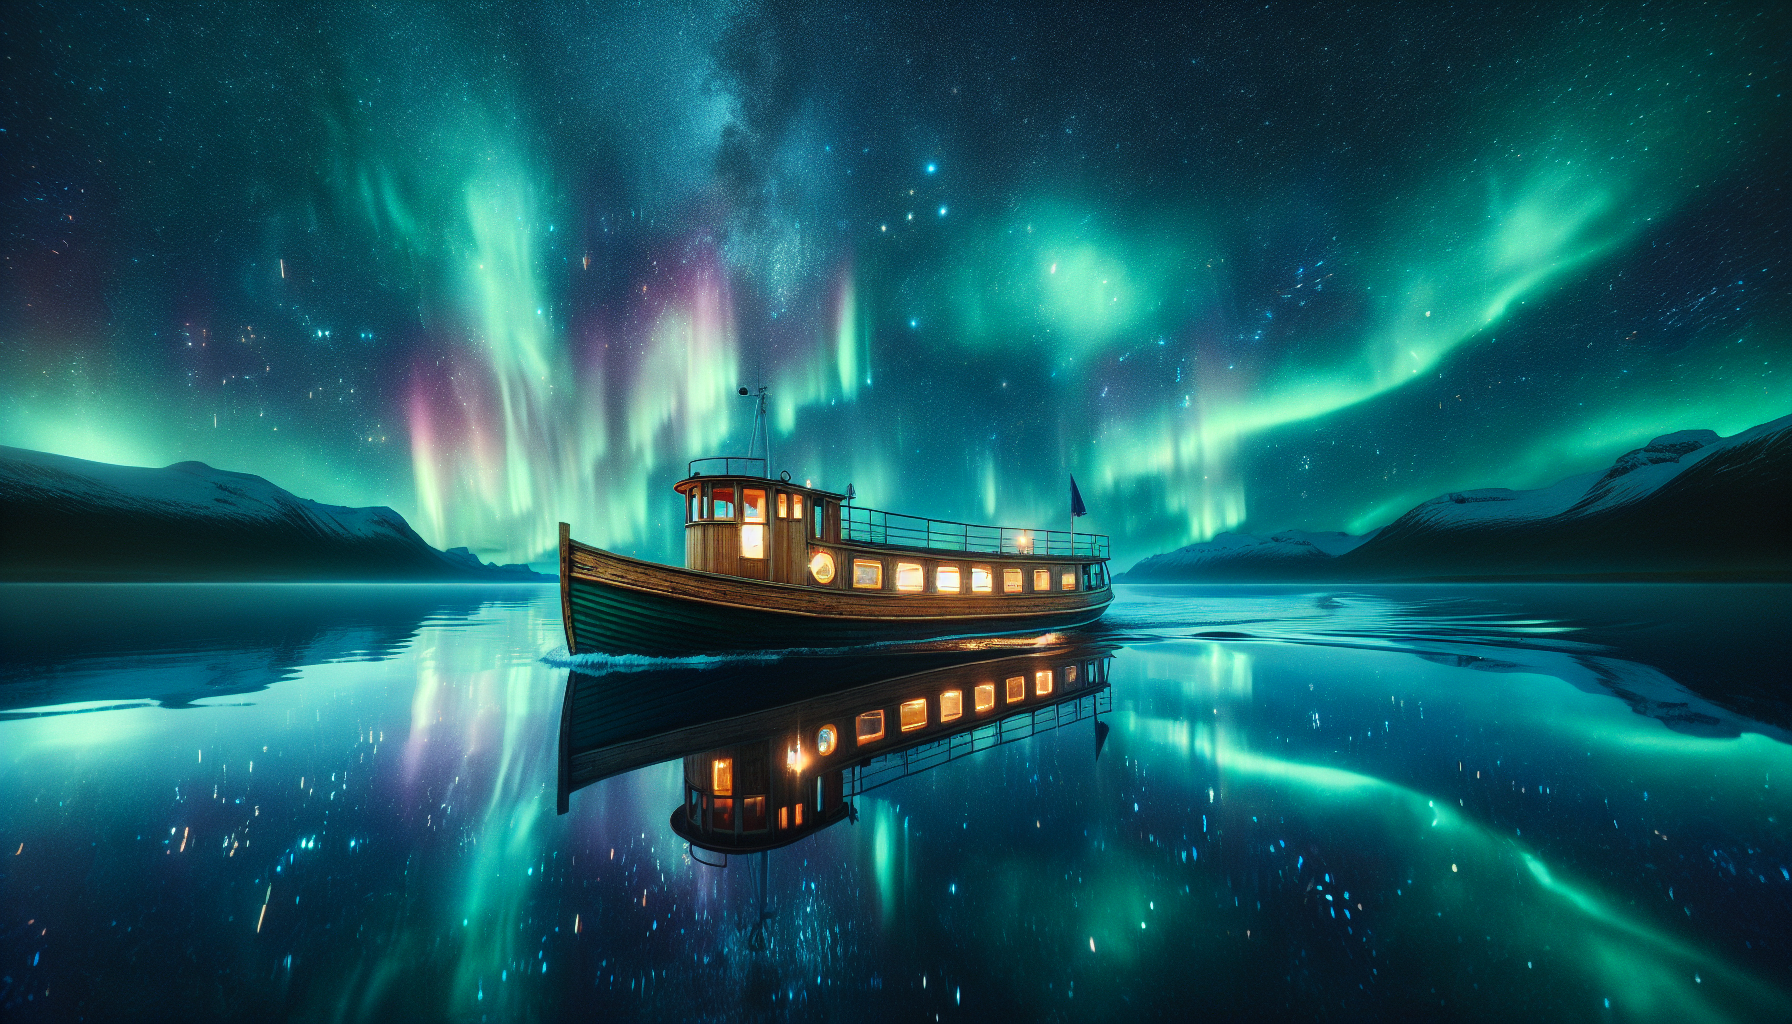 Boat cruise with northern lights in the background